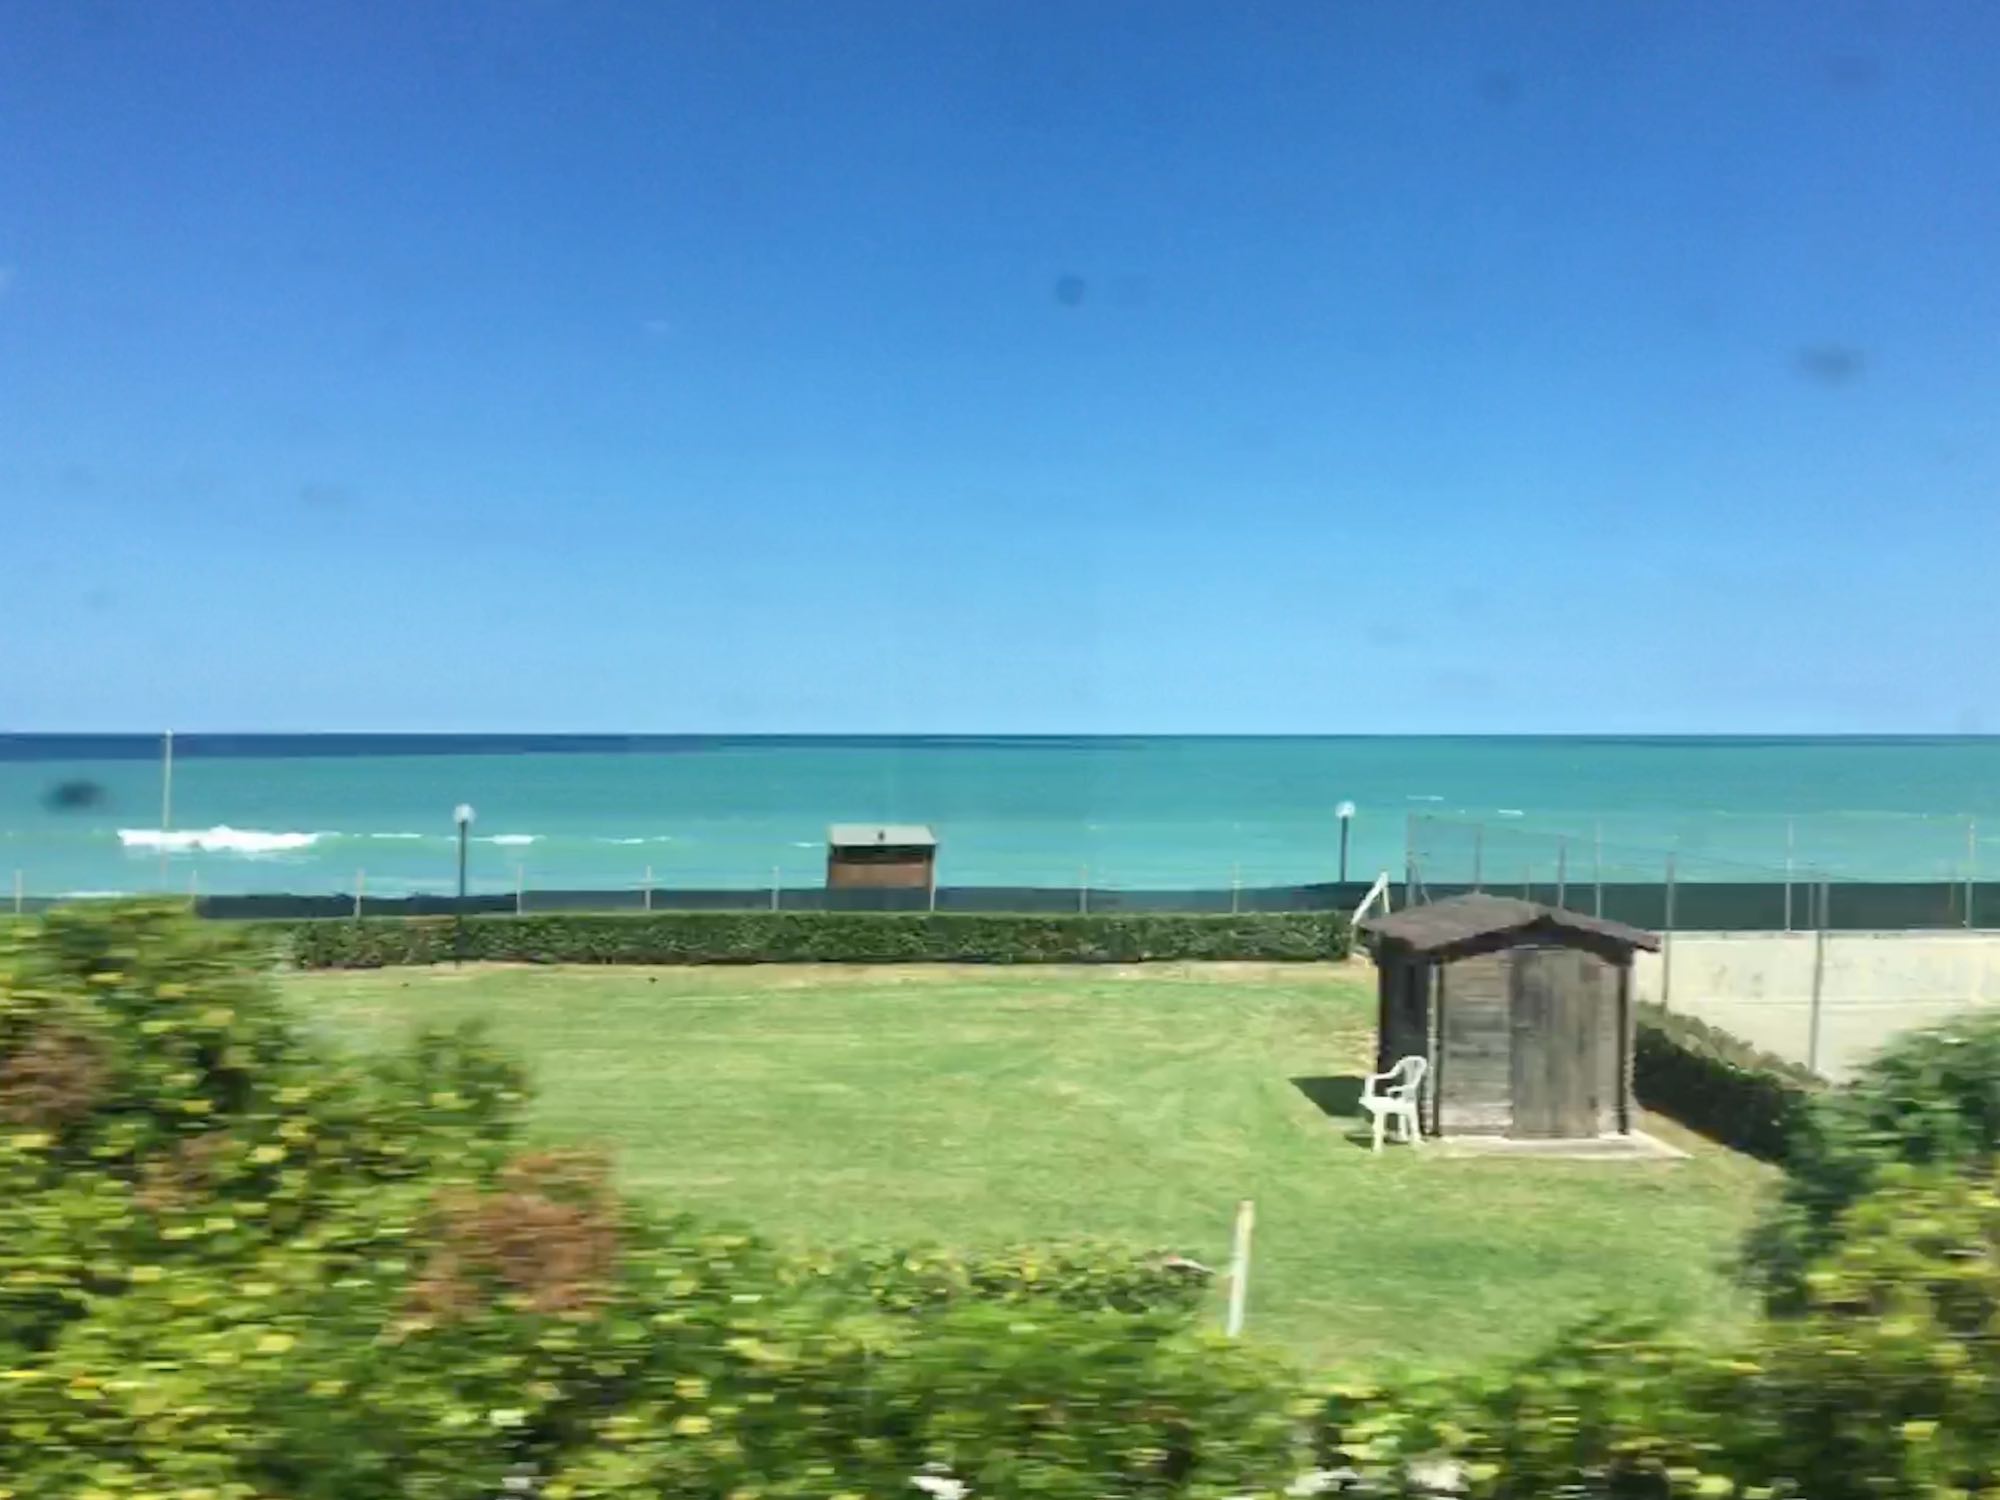 Photo of the Adriatic sea from a speeding train